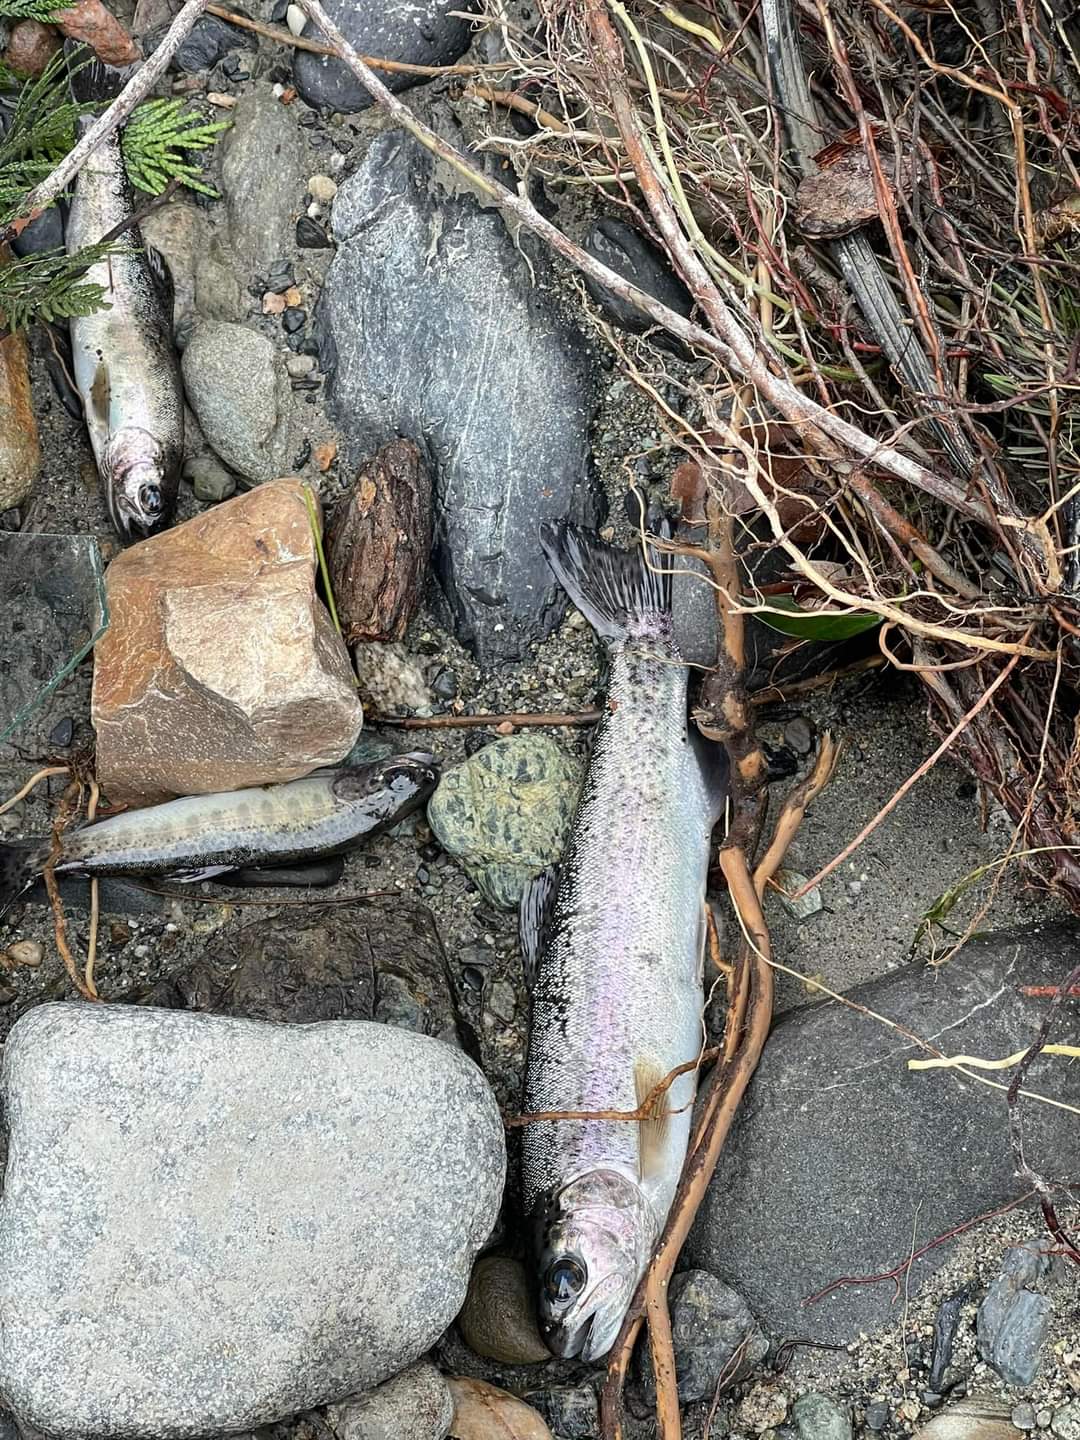 Renee Coghill of Hope Search and Rescue has already found 100 dead fish on dry land off the Coquihalla Highway in the aftermath of catastrophic floods in southern B.C. on Nov. 14 and 15, 2021.